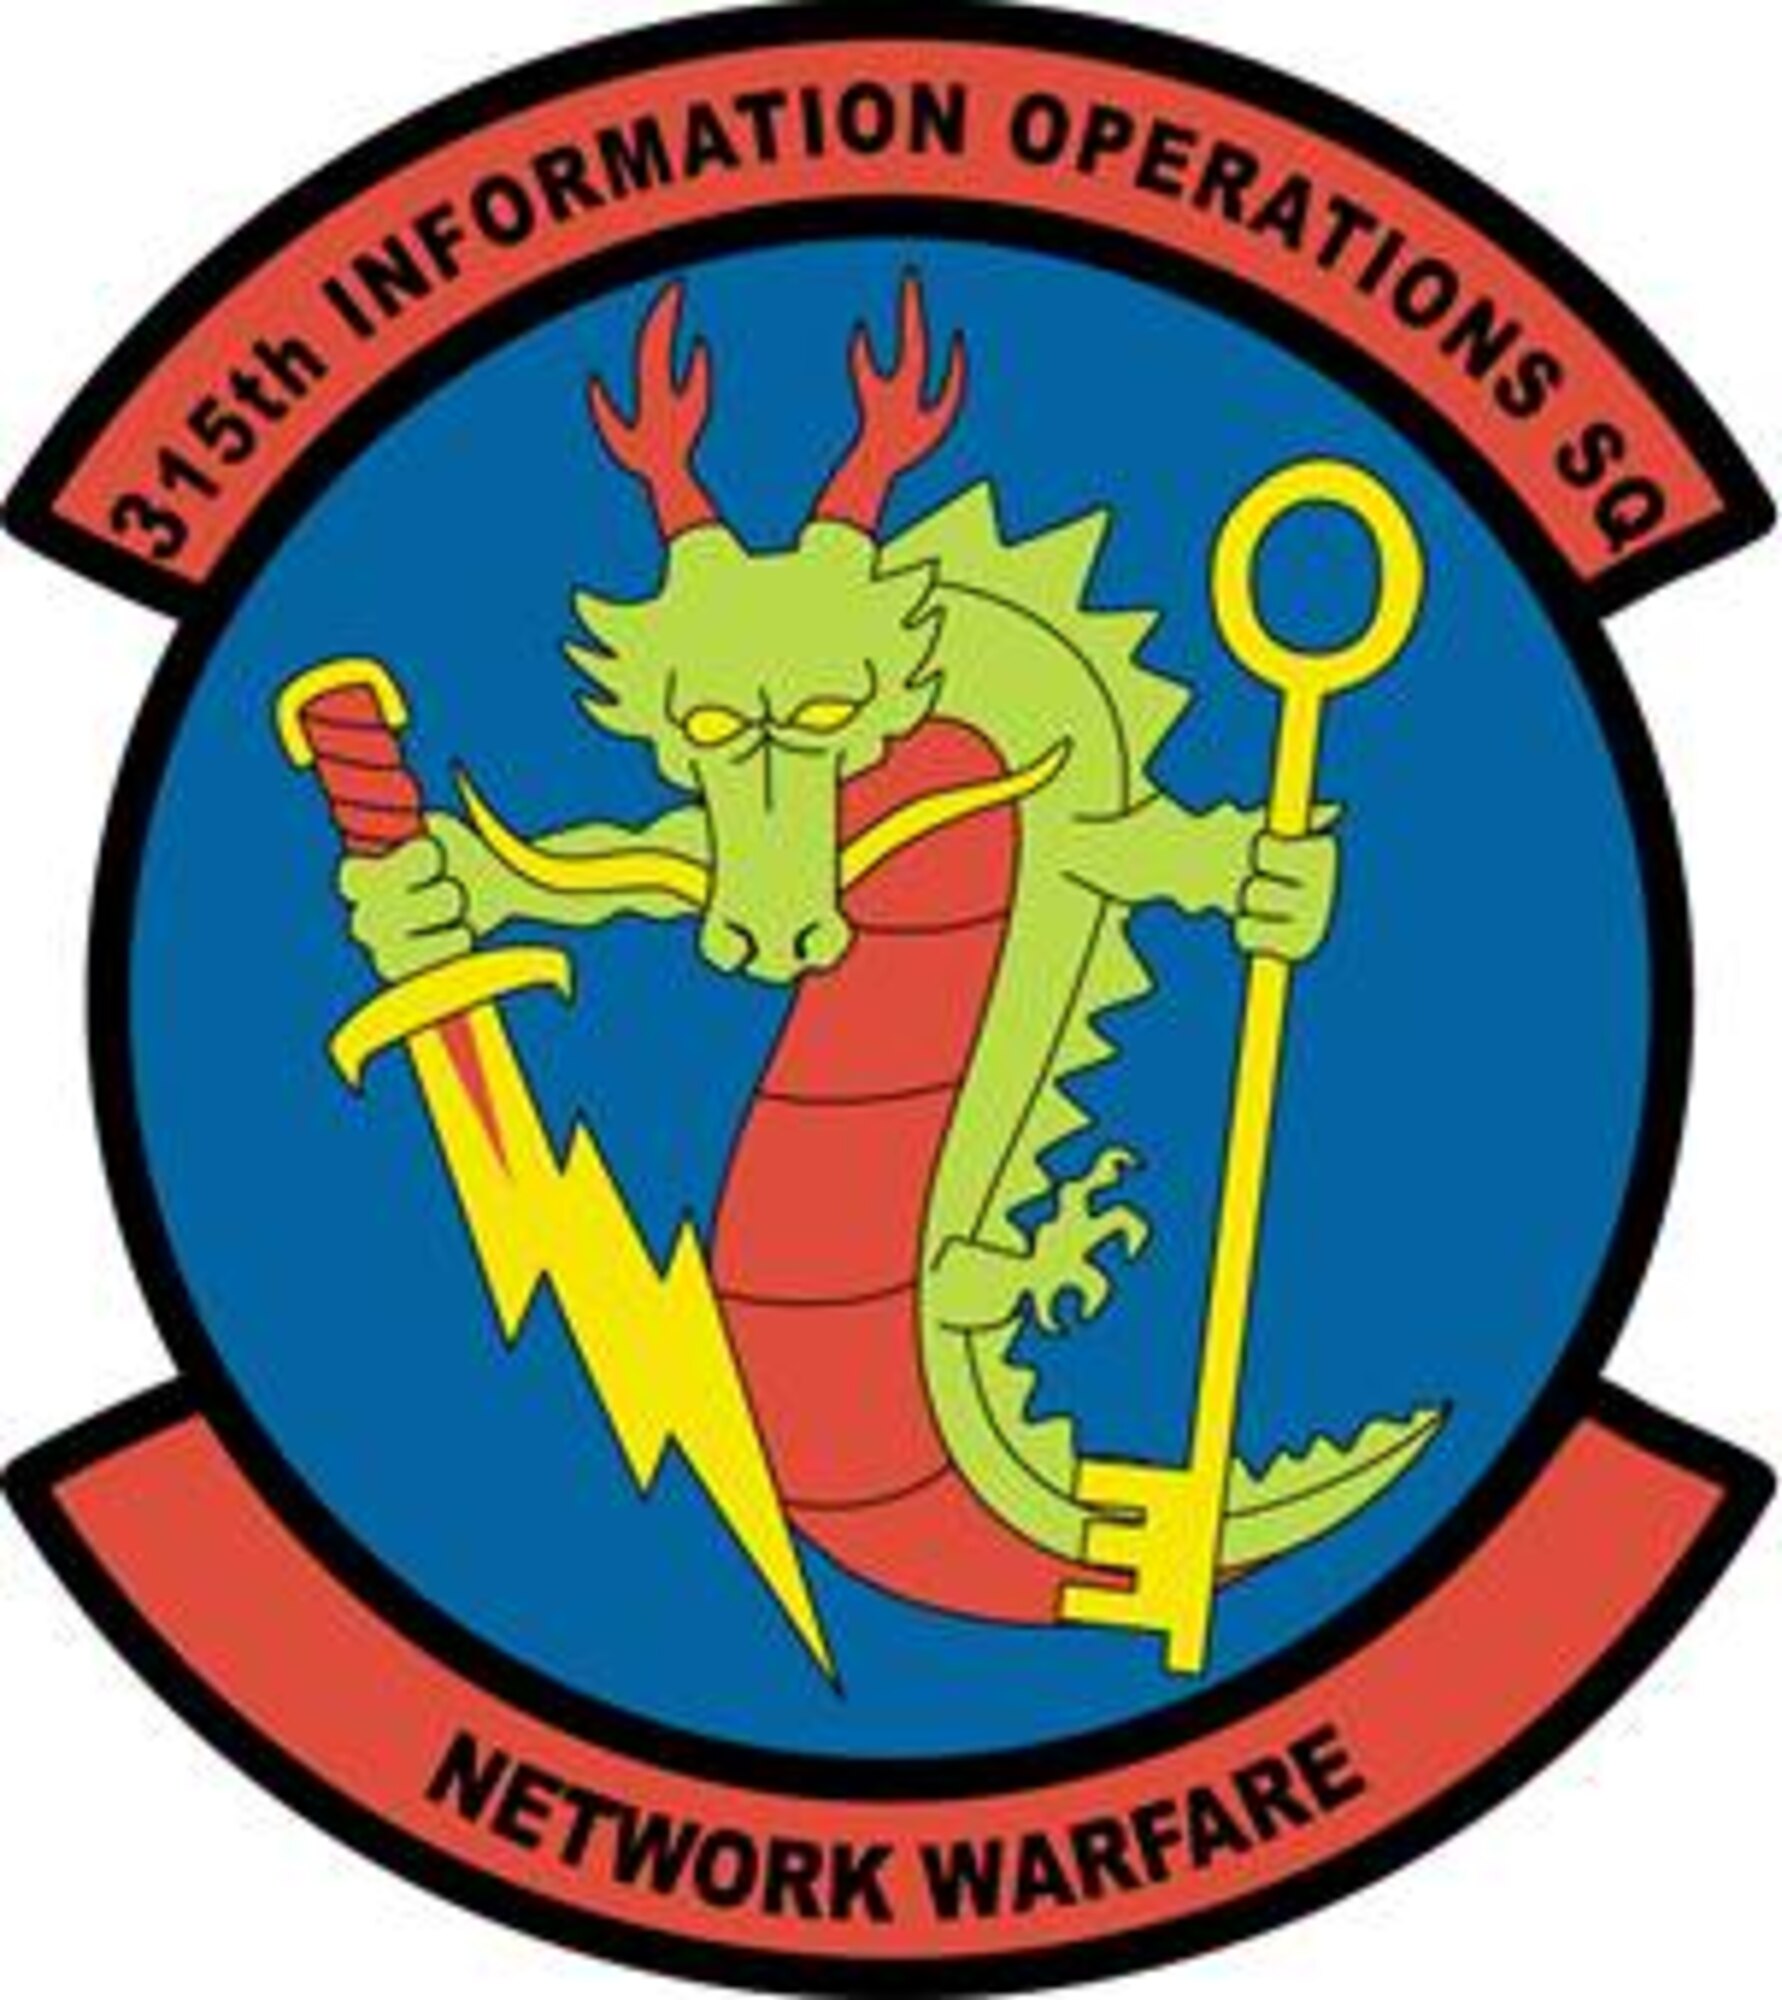 The shield of the 315th Information Operations Squadron, a unit of the 67th Network Warfare Wing at Lackland Air Force Base, Texas.